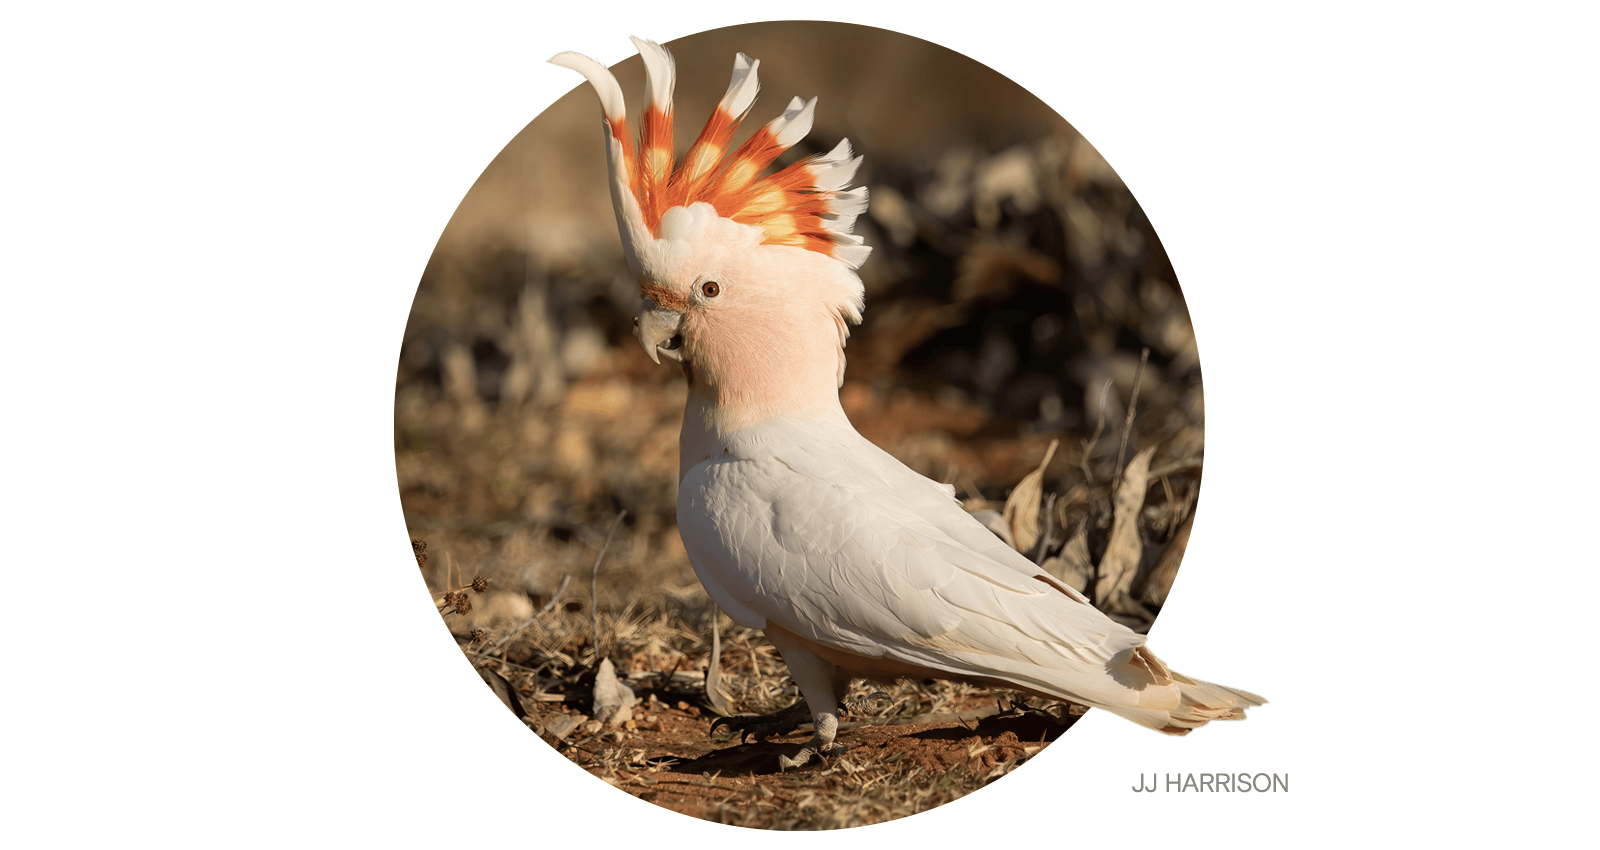 The pink cockatoo